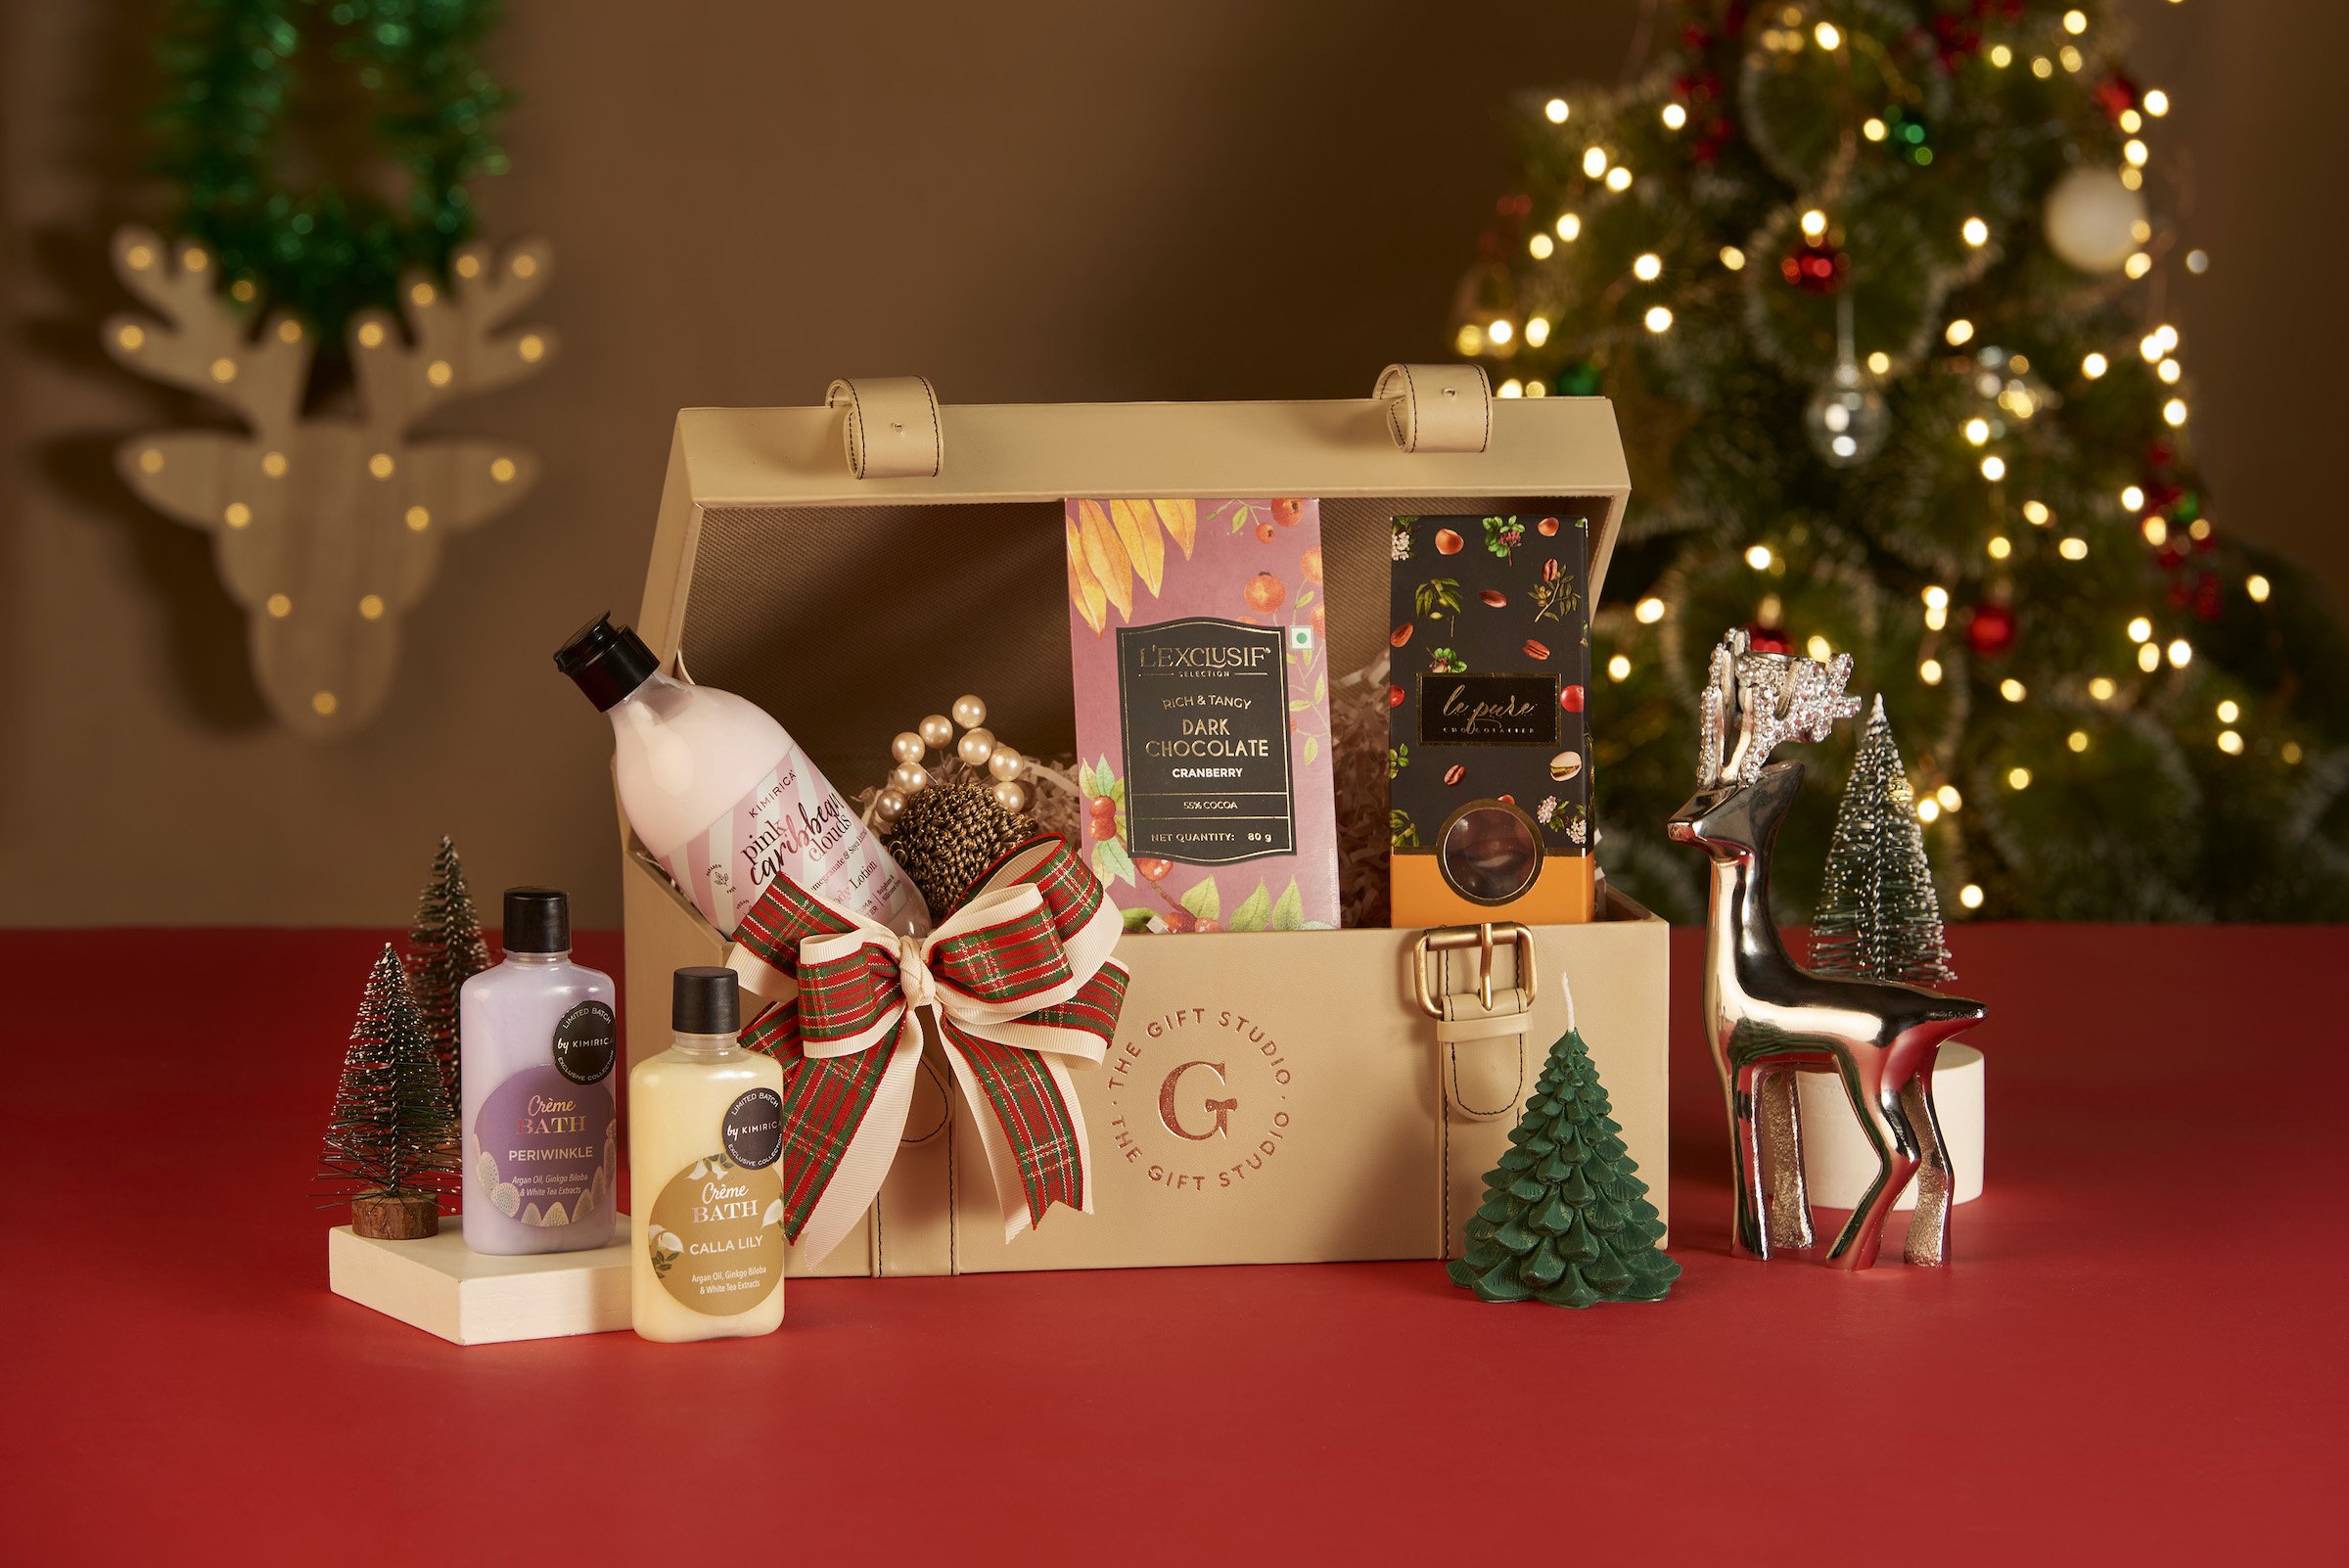 Celebrate Christmas Cheer with 'The Gift Studio' this Holiday